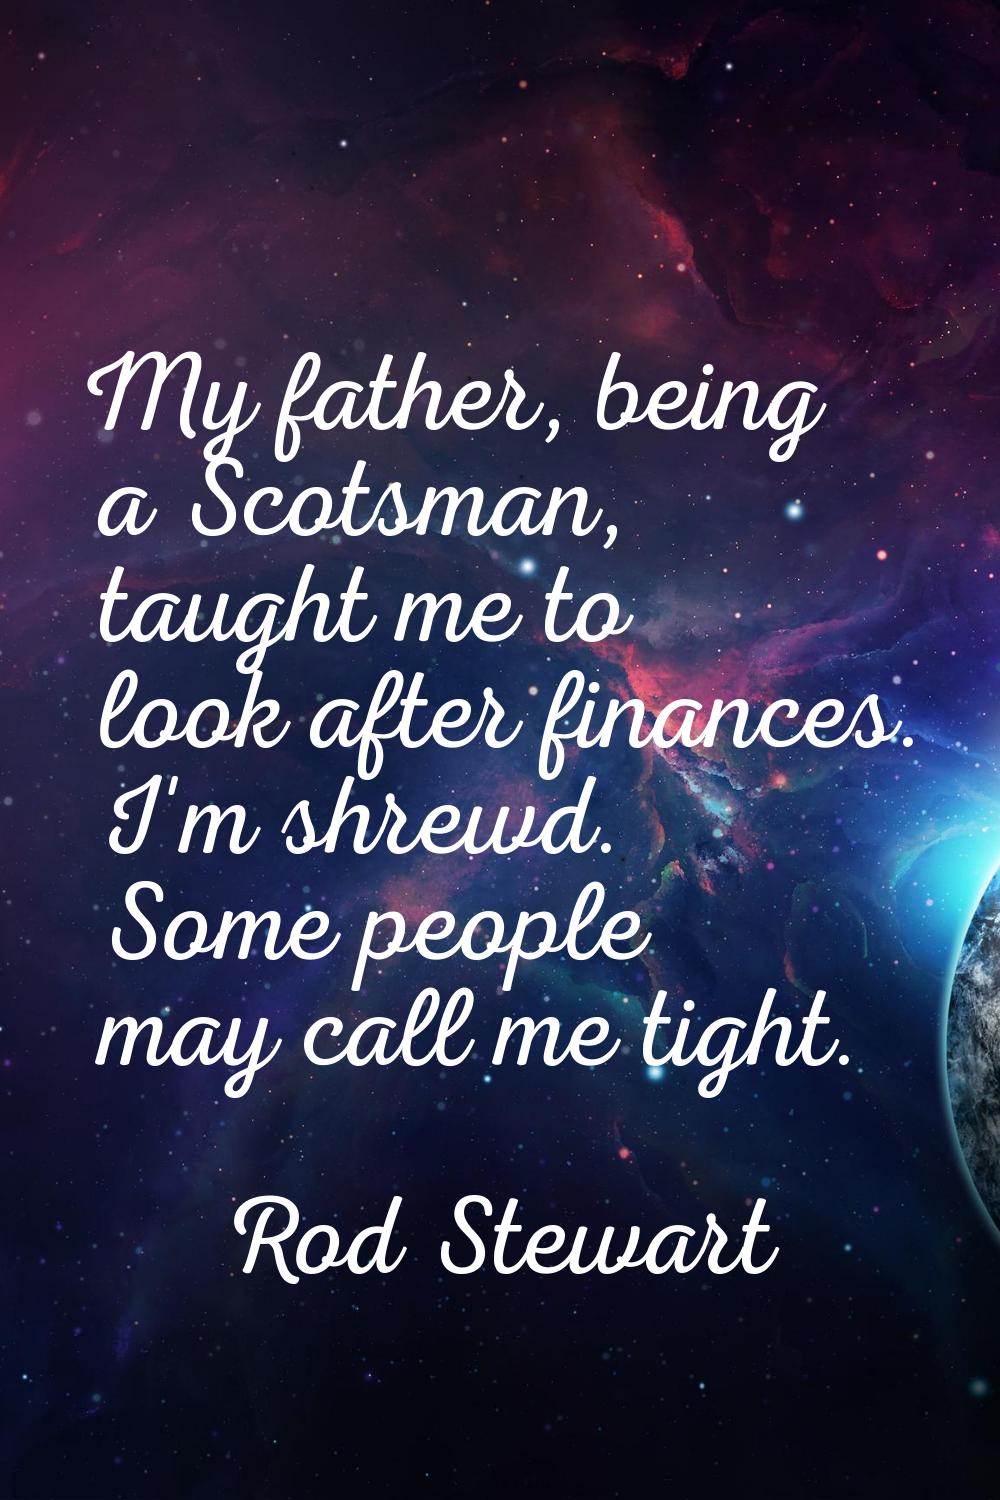 My father, being a Scotsman, taught me to look after finances. I'm shrewd. Some people may call me 